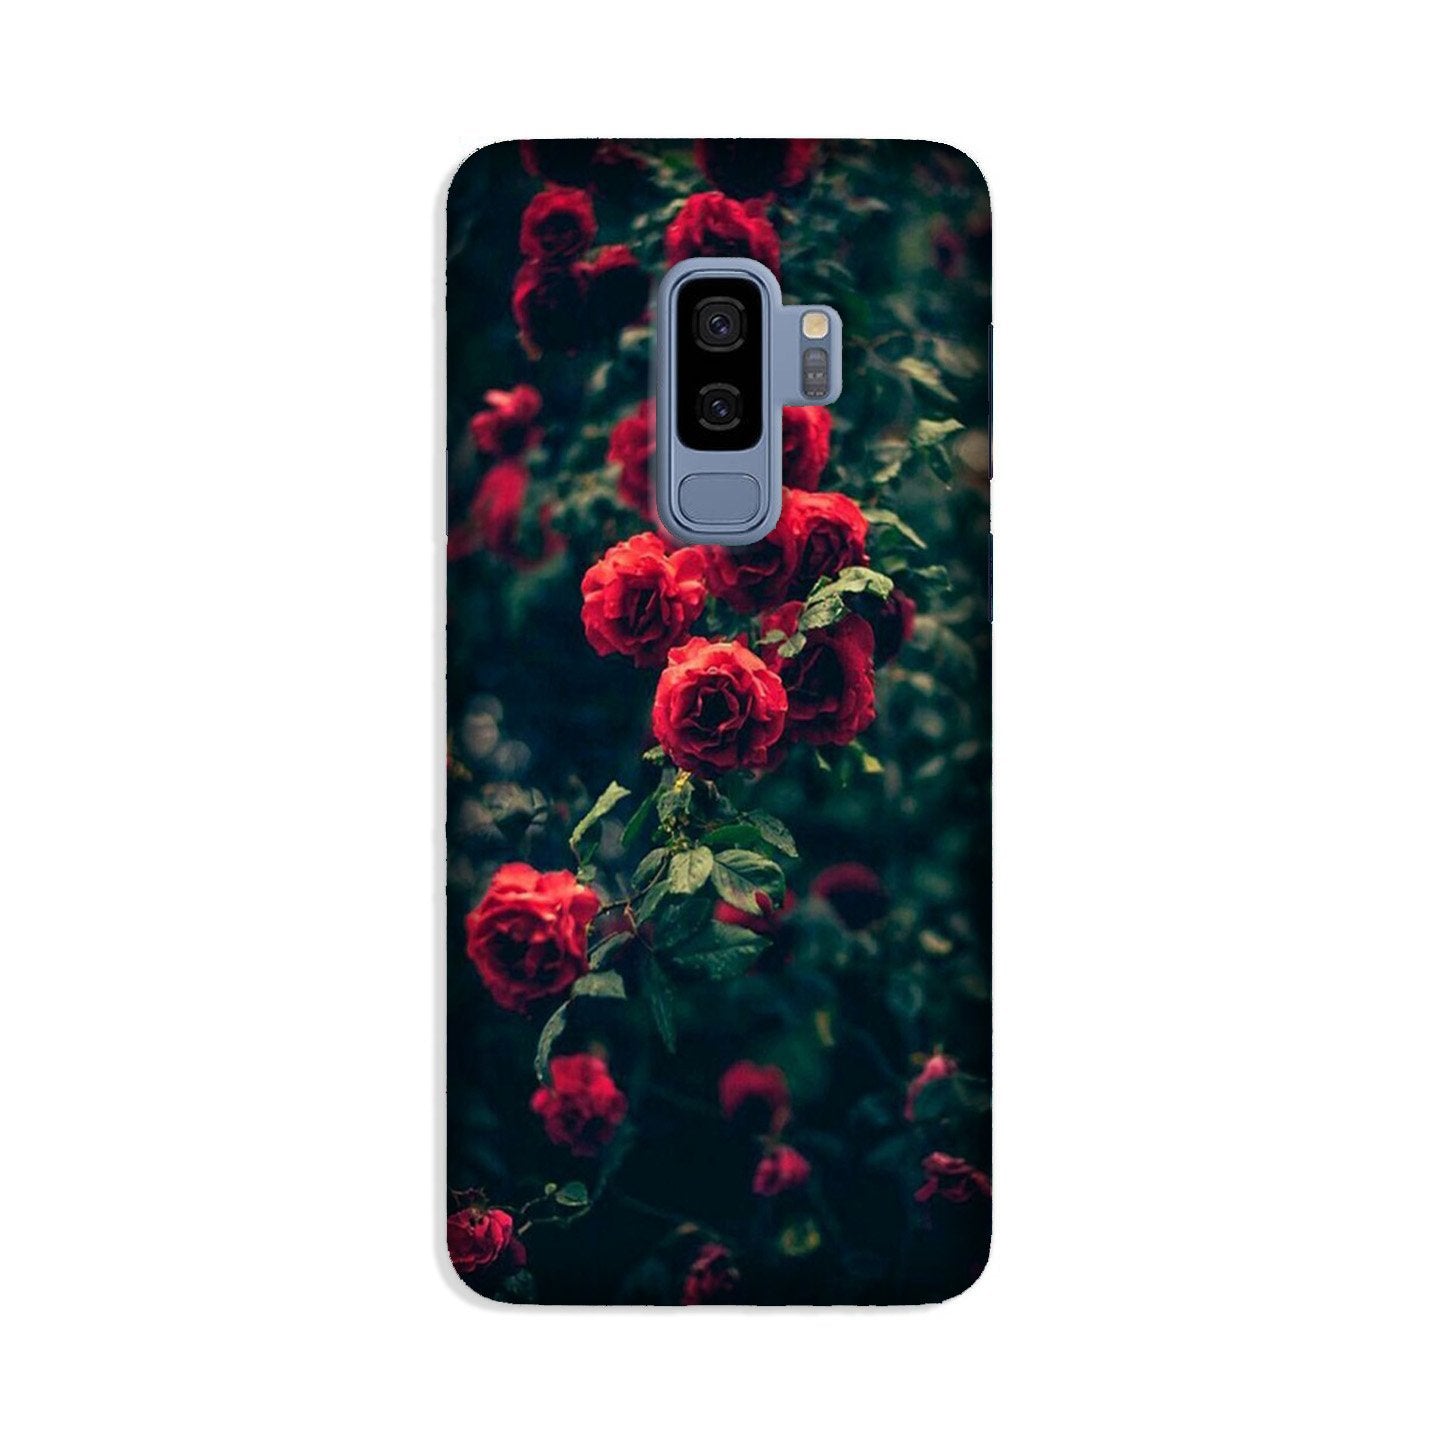 Red Rose Case for Galaxy S9 Plus